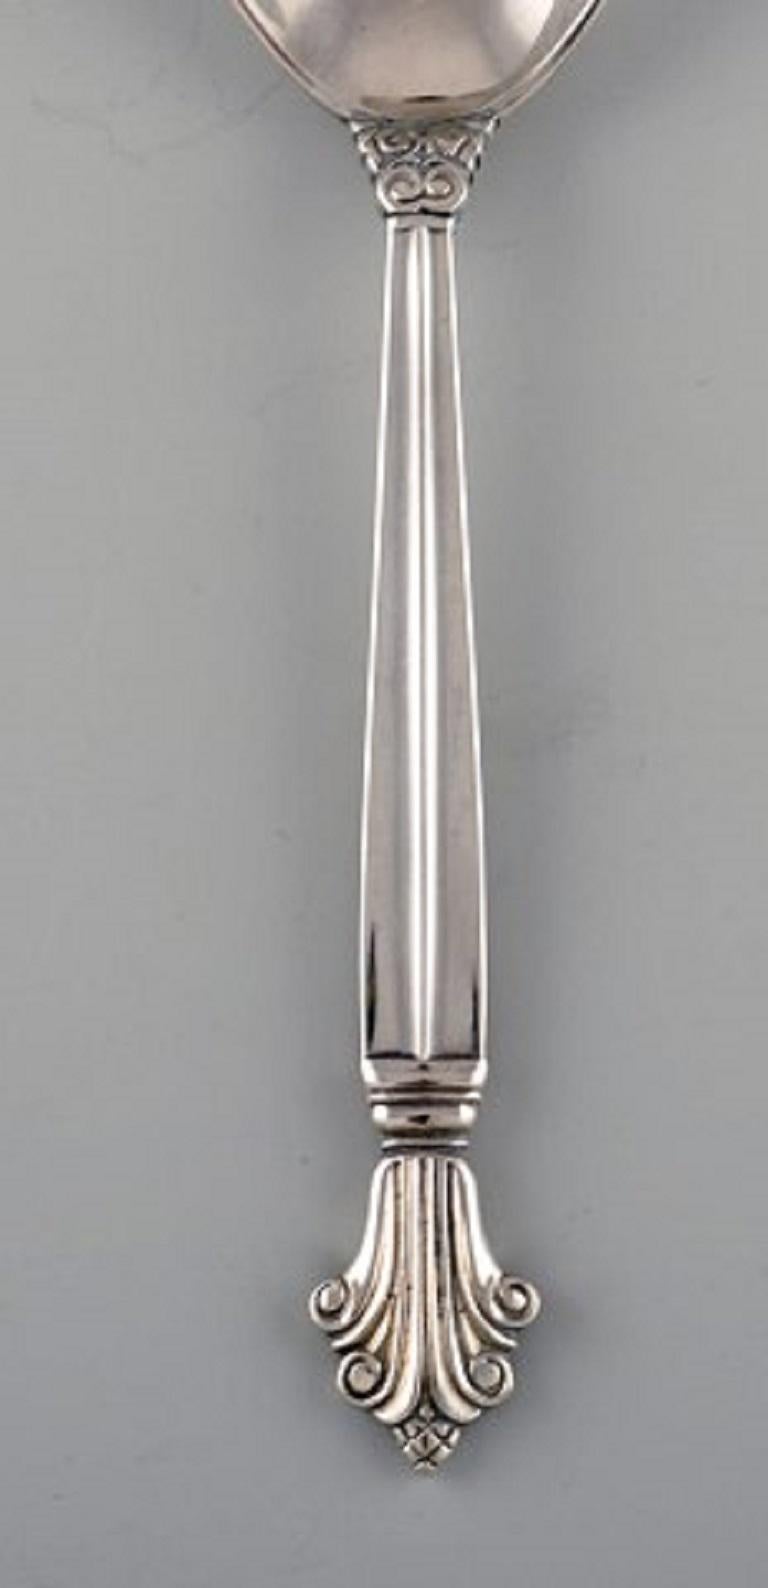 Johan Rohde for Georg Jensen. Early acanthus gourmet spoon in sterling silver. Dated 1922.
Size: Length 17 cm.
Stamped.
In excellent condition.
Our skilled Georg Jensen silversmith / jeweler can polish all silver and gold so that it looks like